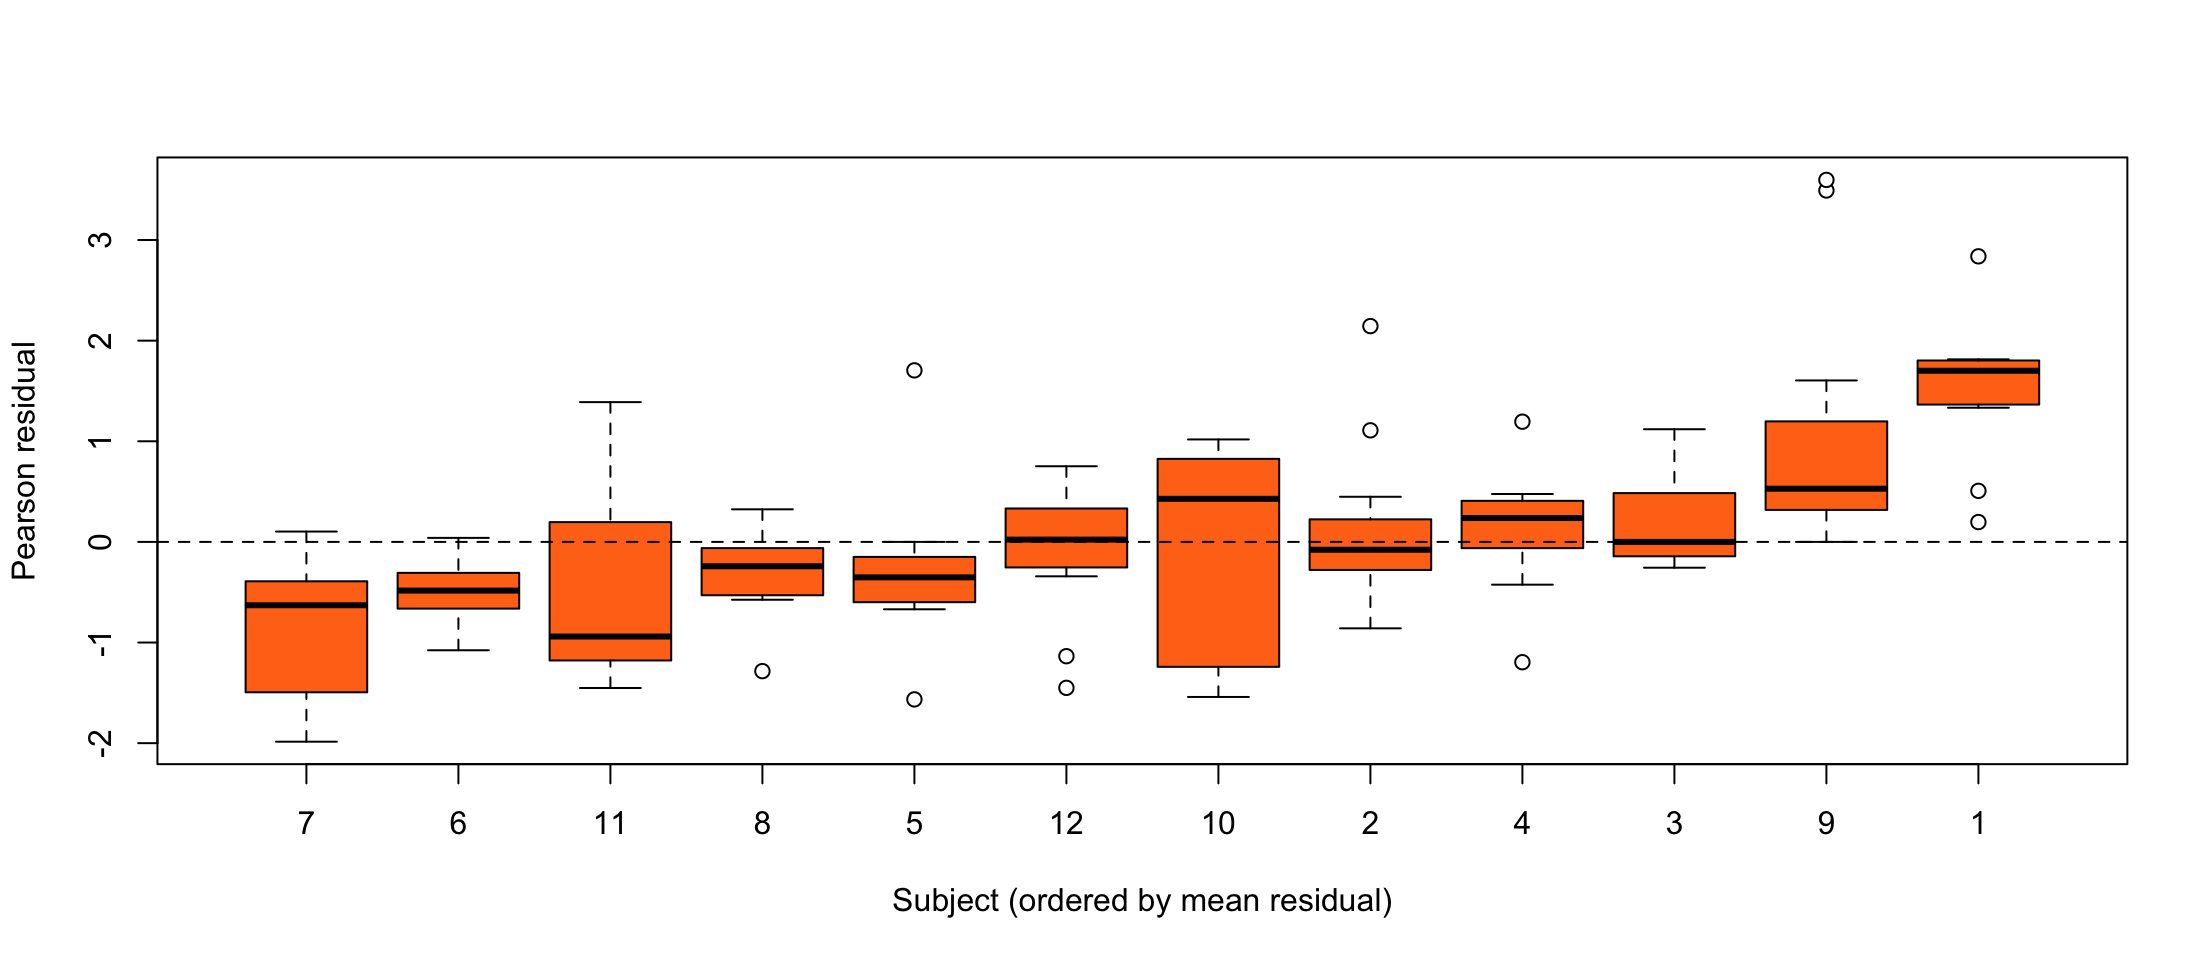 Residuals for each individual in the theopylline study from model ([-@eq-pkm]).